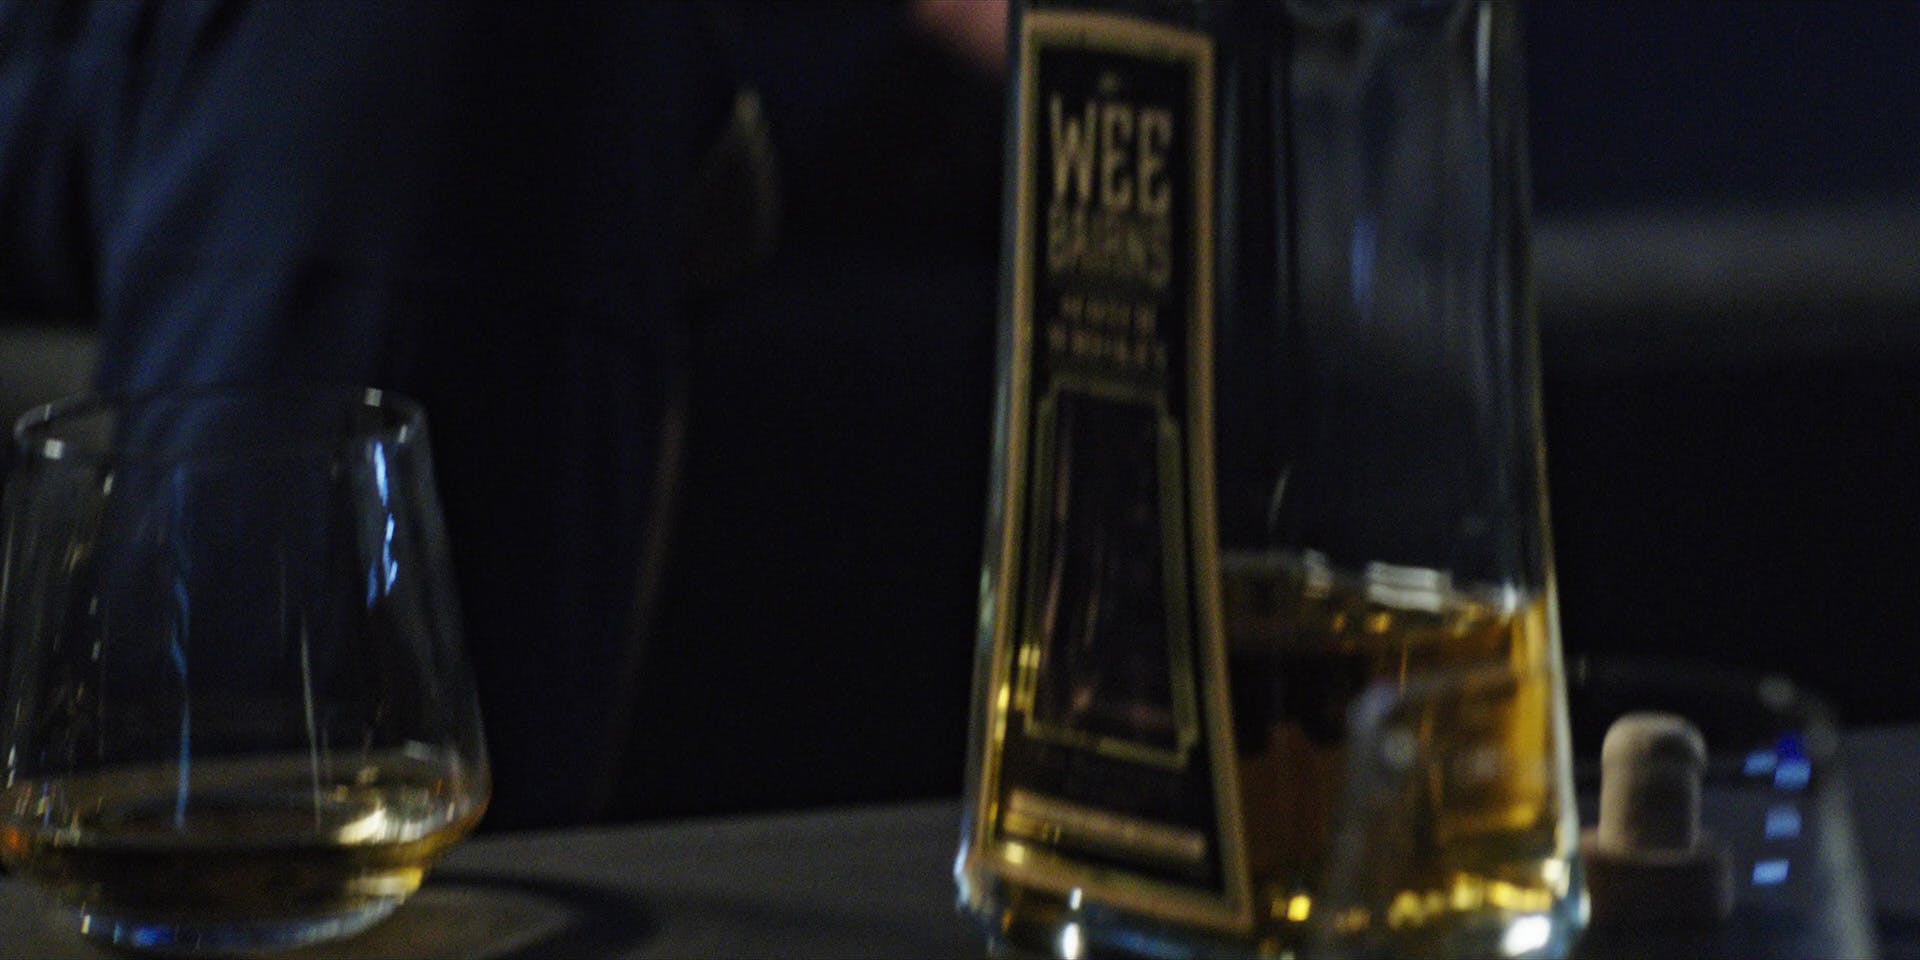 Close-up of Captain Gabriel Lorca's bottle of Wee Bairns and a cocktail glass in his quarters in 'Lethe'